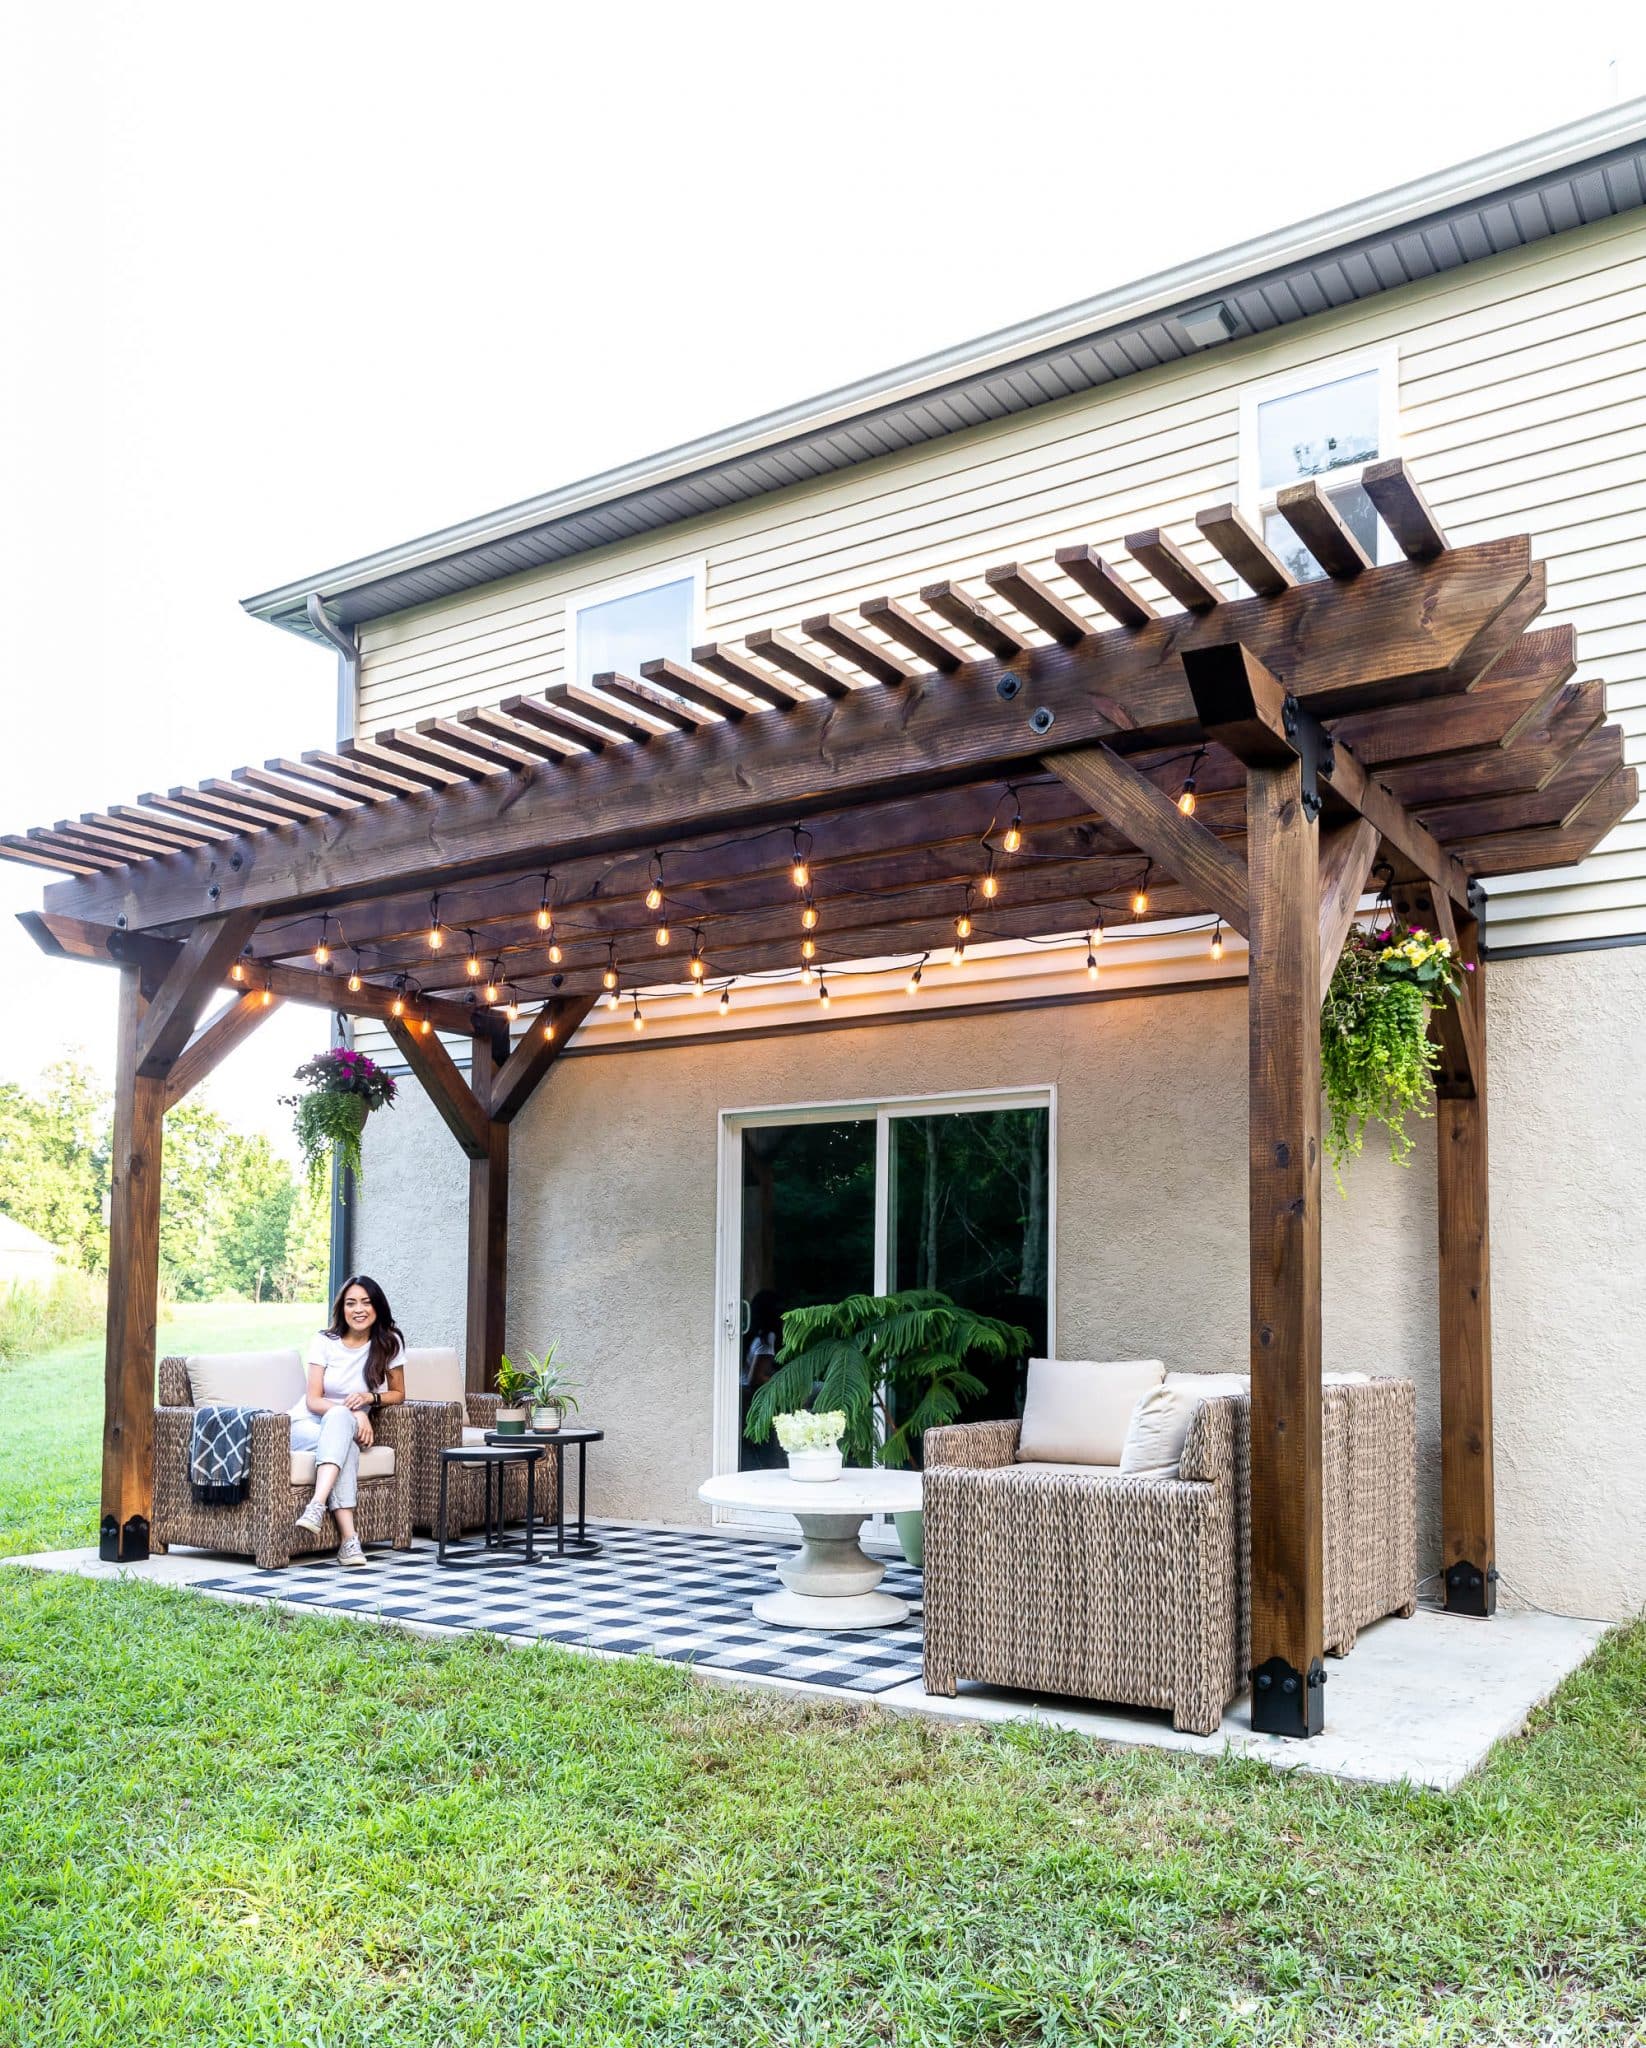 How To Stain And Finish A Pergola The House Of Wood